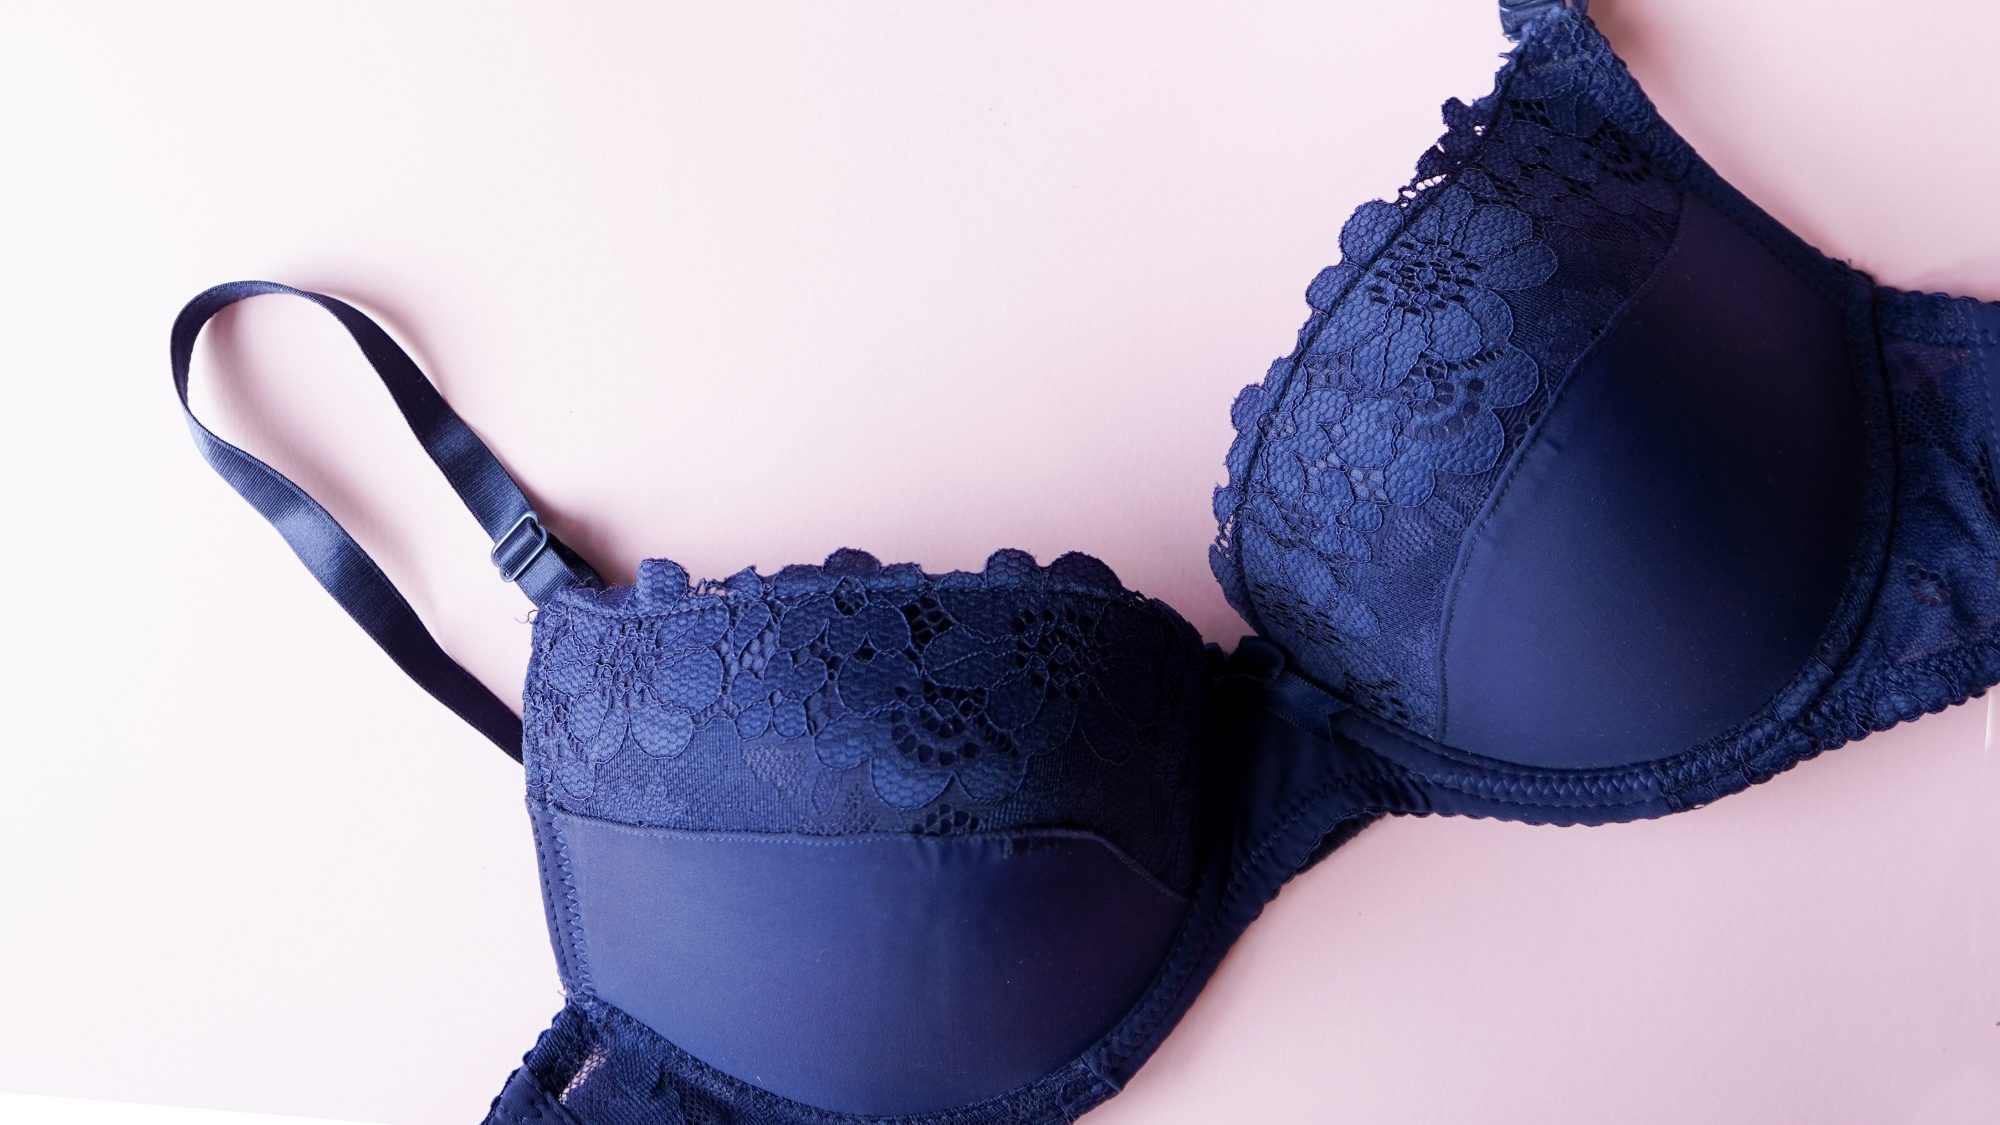 Wrong bra size can lead to many health problems, women told - Ghana  Business News